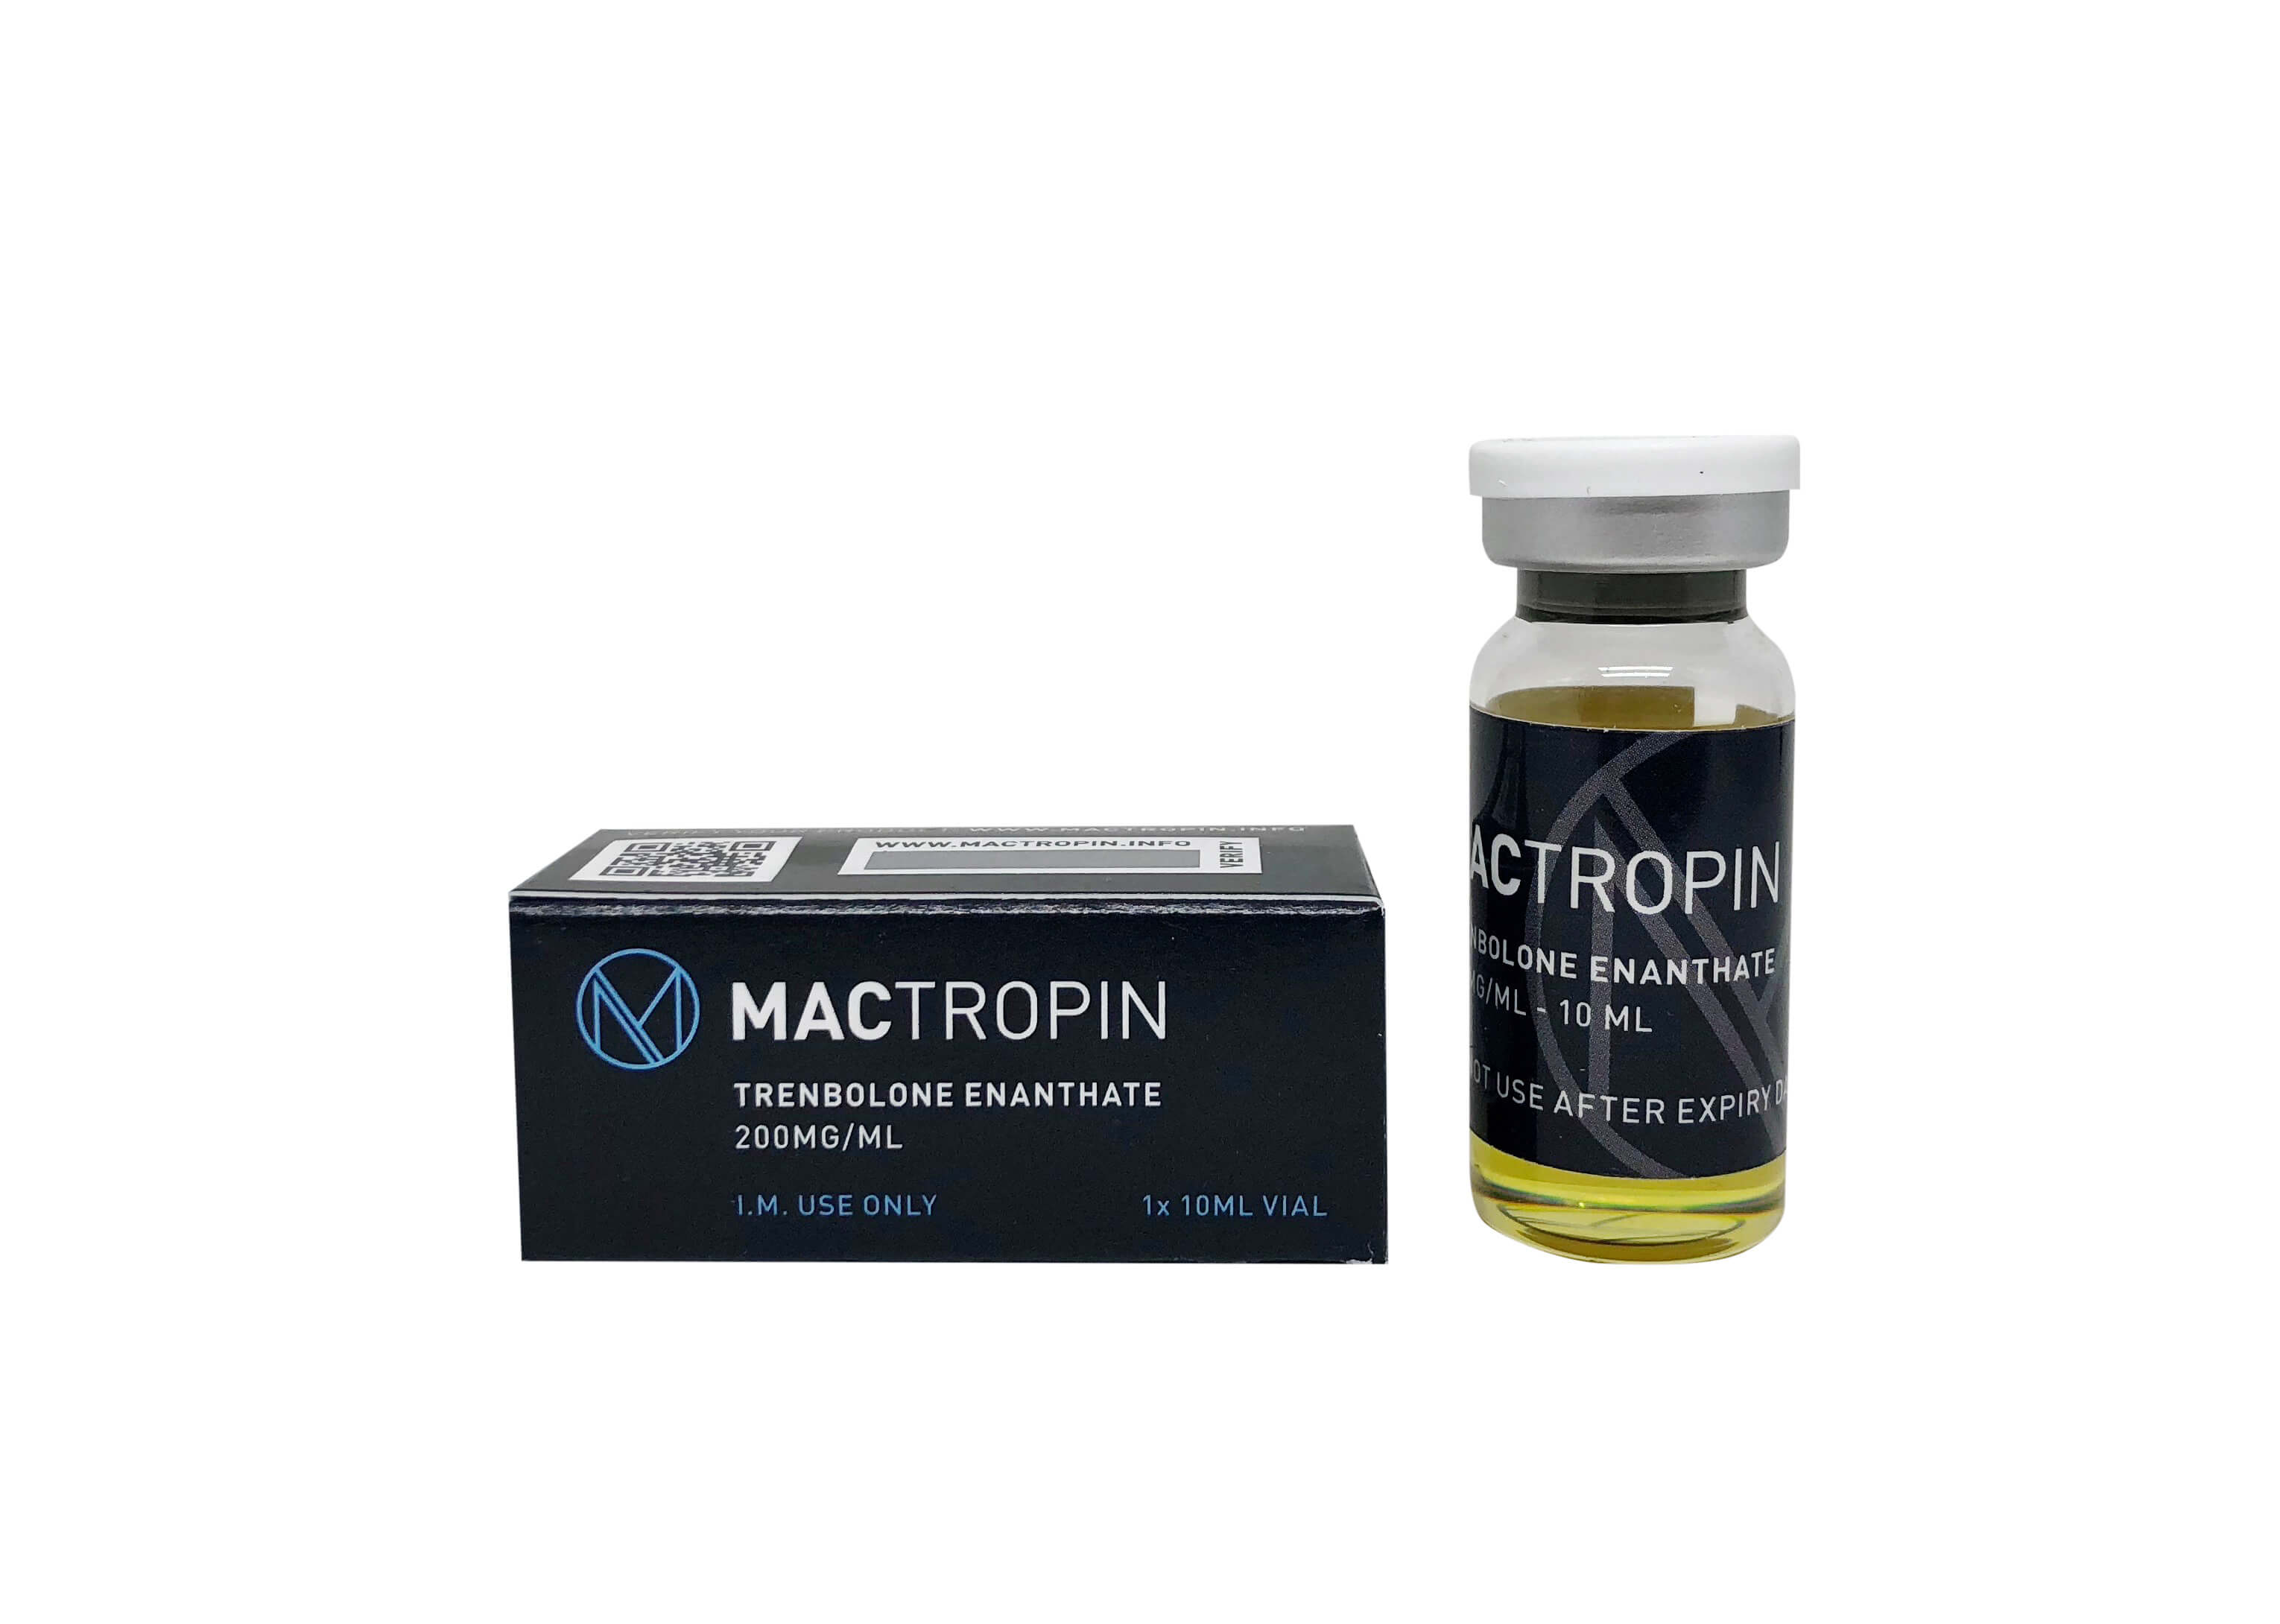 Trenbolone enanthate 200mg 10ml - Mactropin • Top Steroids Online